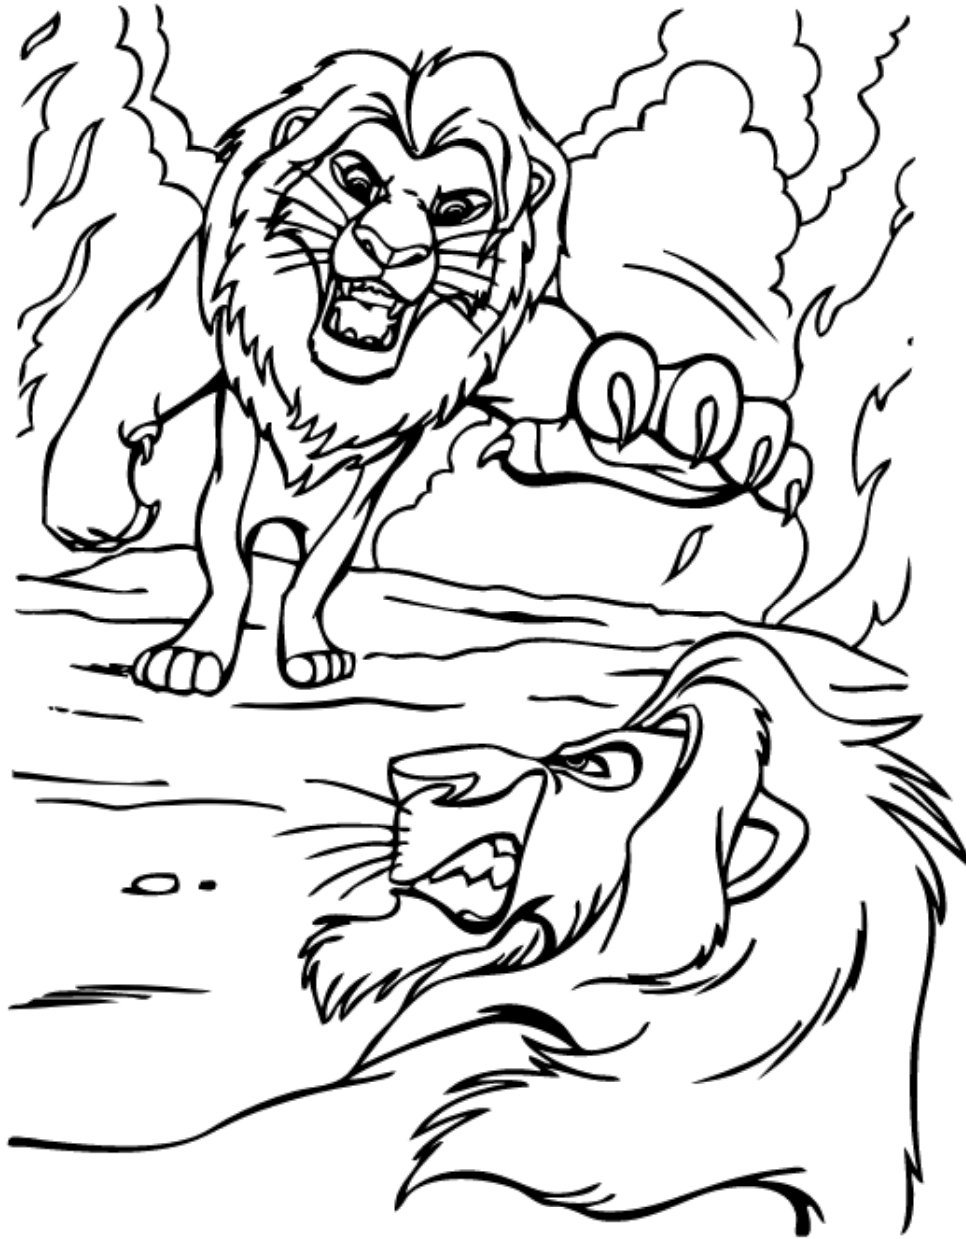 mufasa vs scar coloring page free printable coloring pages for kids